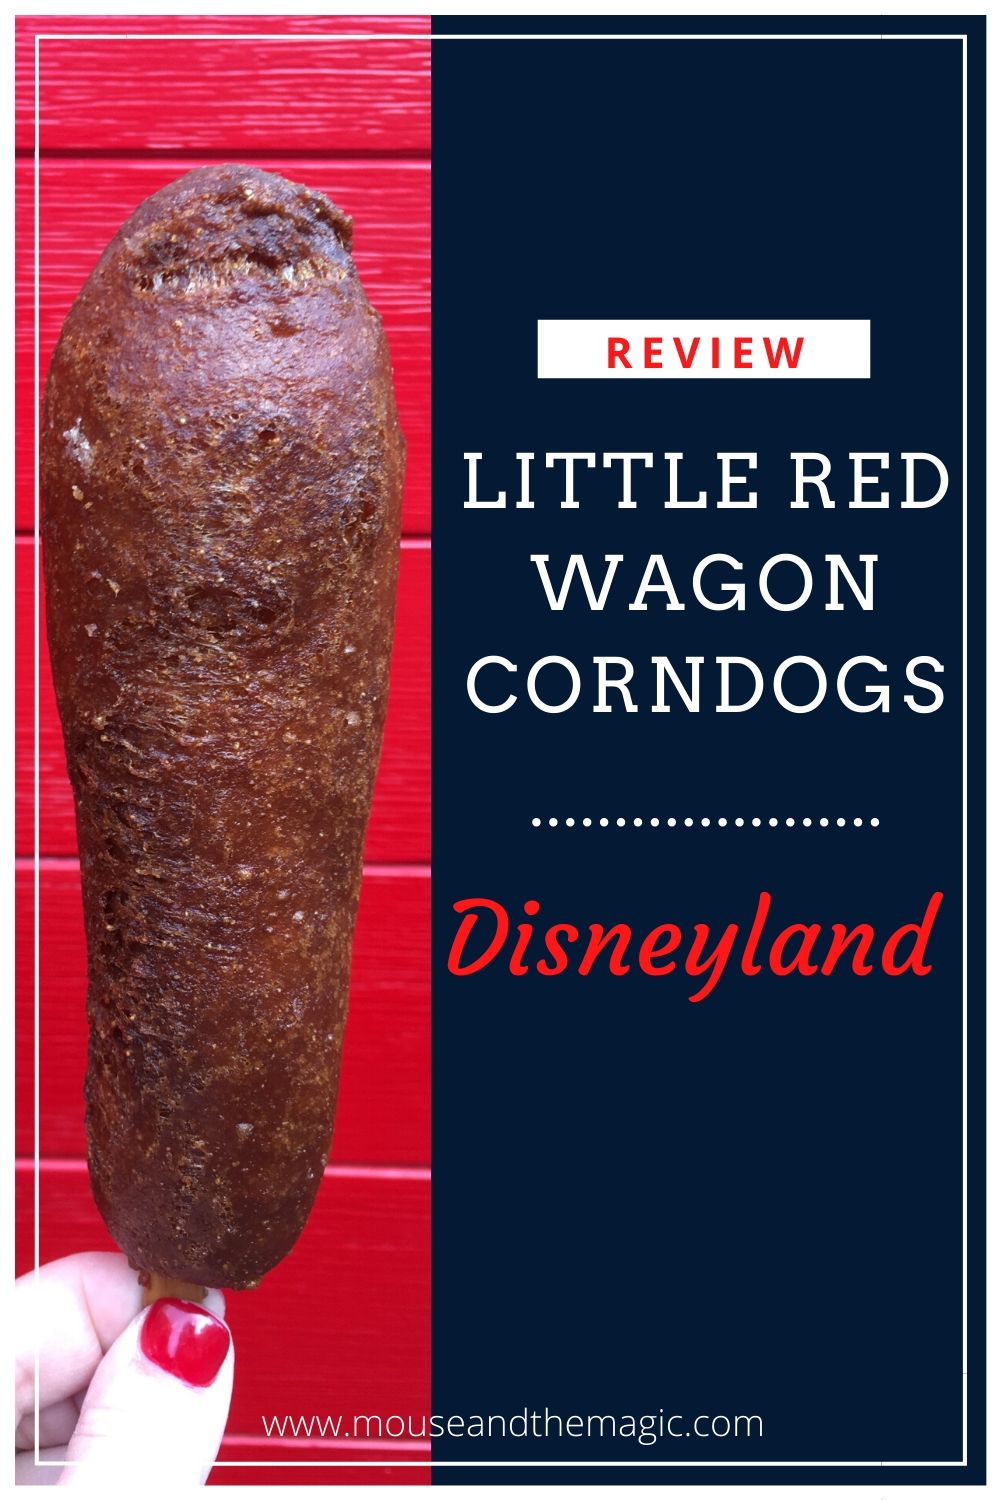 Review- Little Red Wagon Corn Dogs - Disneyland